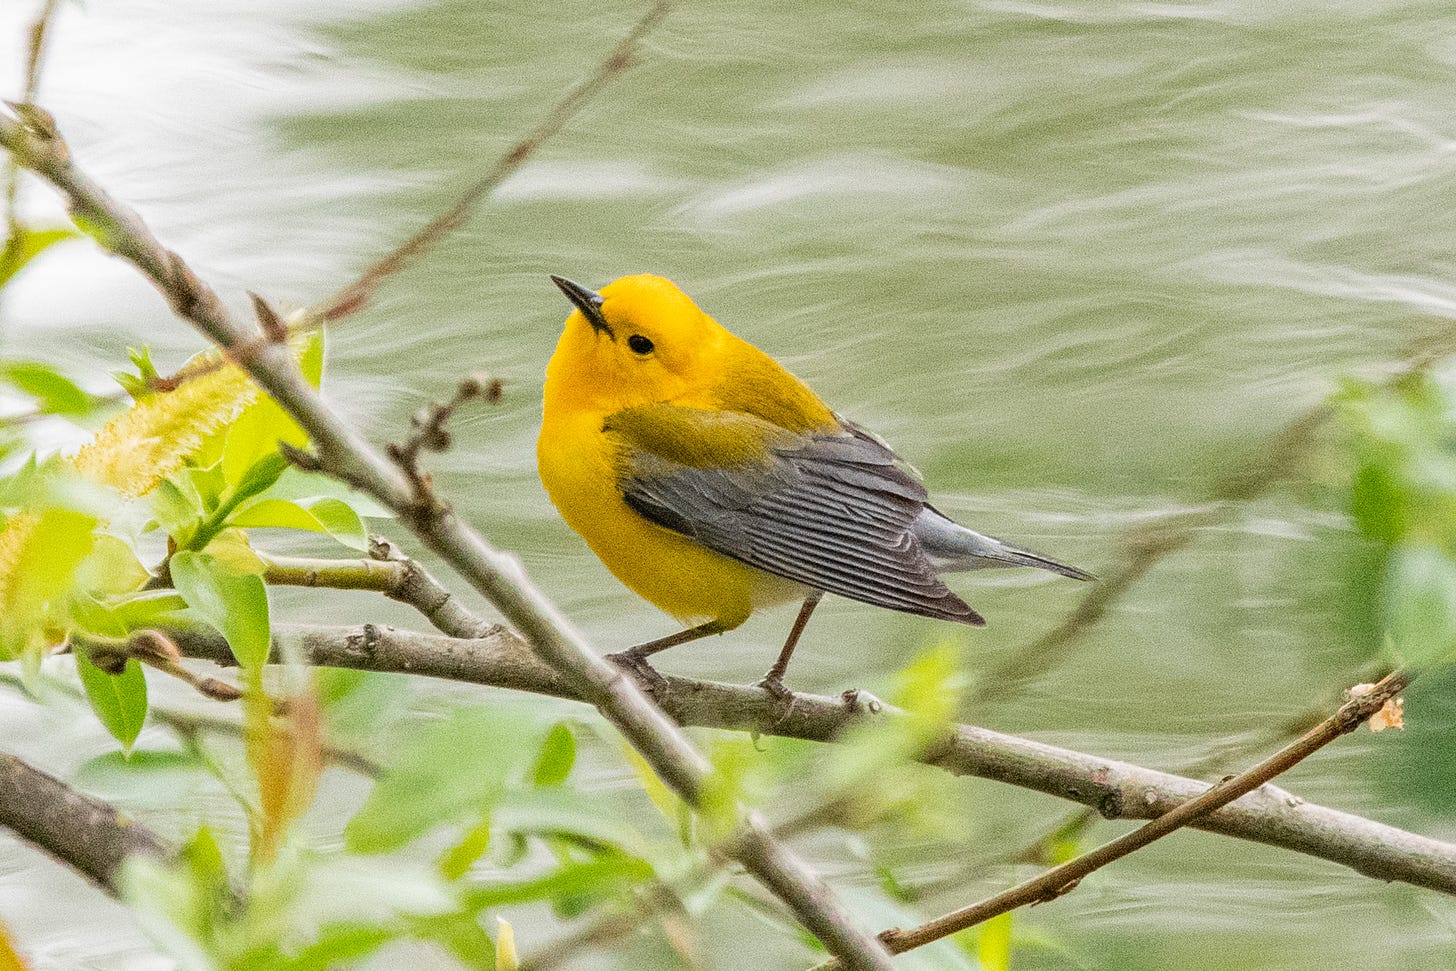 A Peeps-like prothonotary warbler, beak in the air, head slightly cocked, against a background of pale green, wavy water